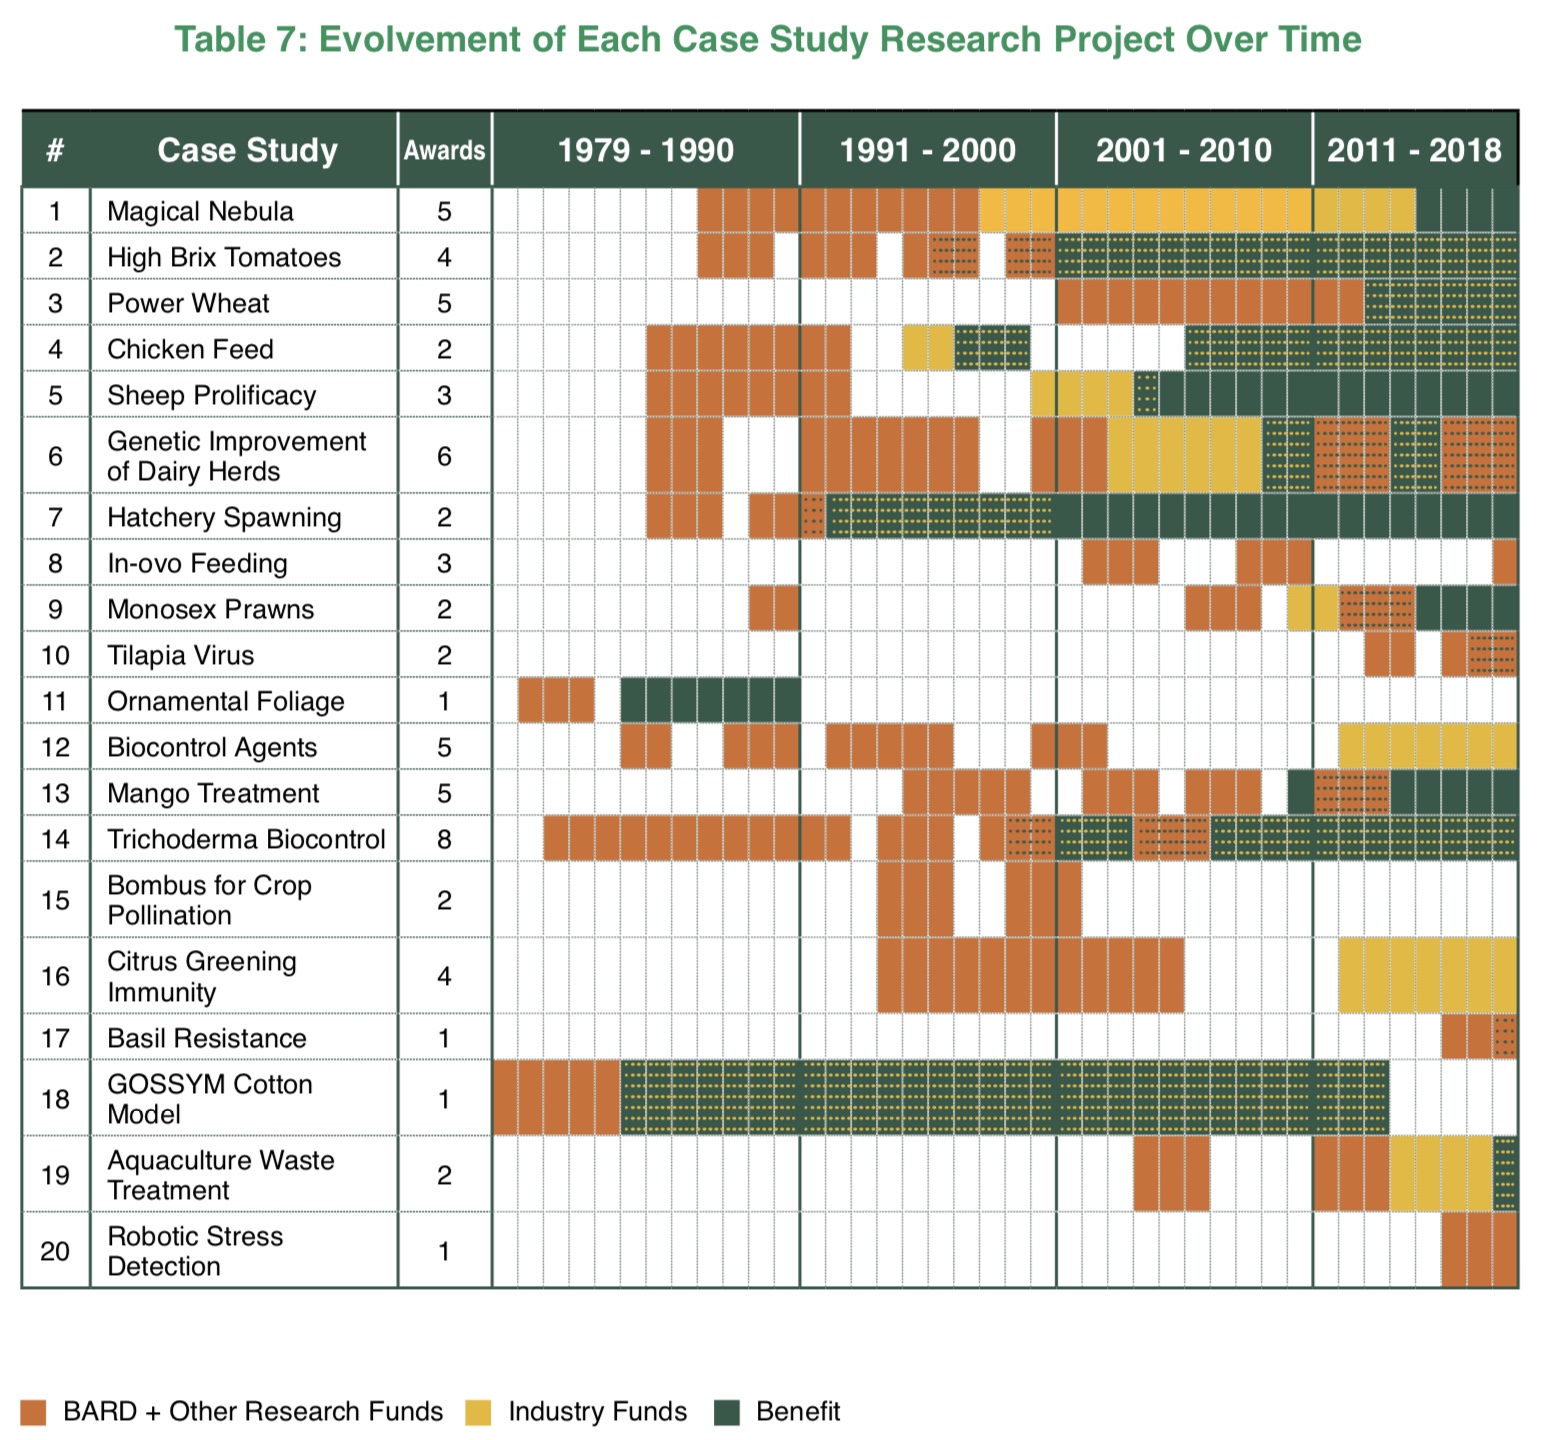 Table 7: Evolvement of Each Case Study Research Project Over Time